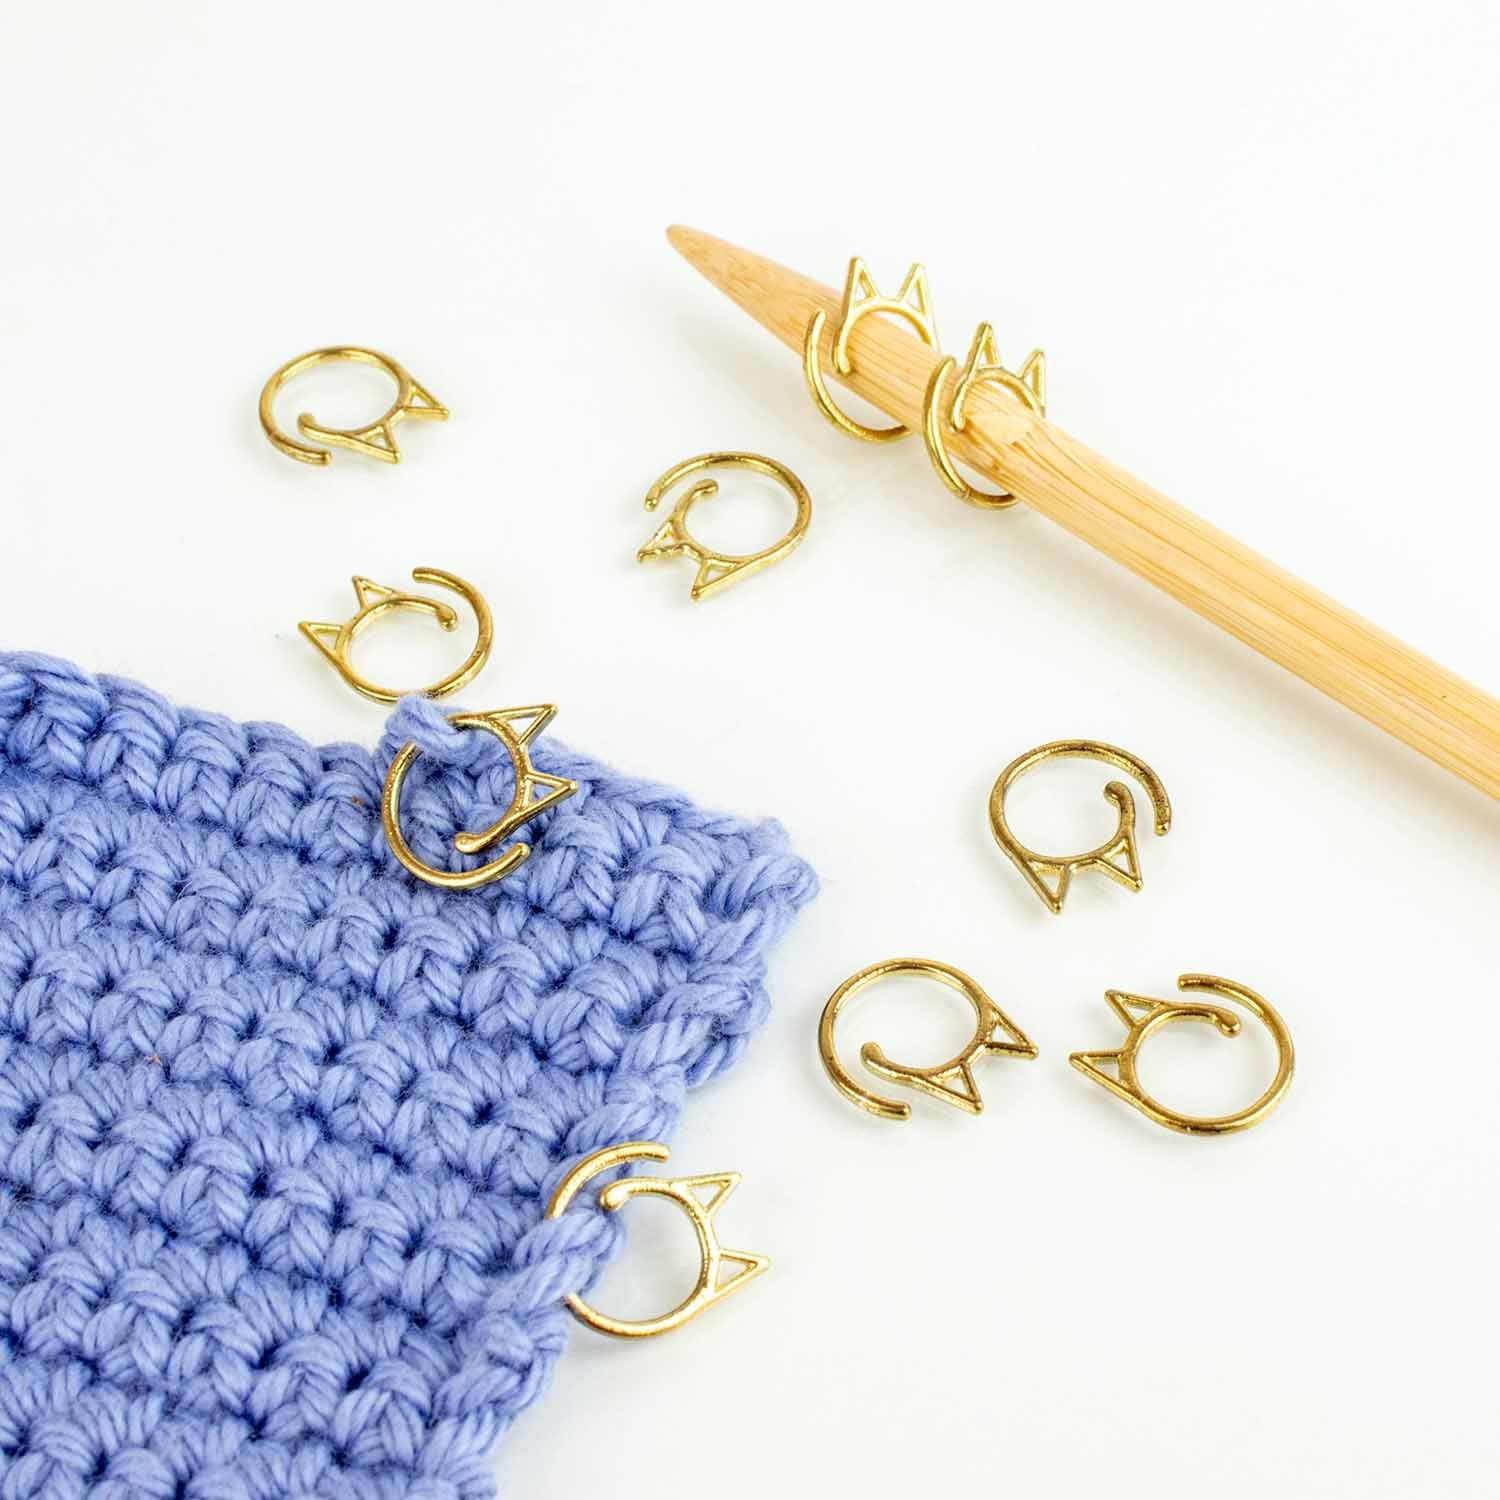 DPXWCCH Removable Stitch Markers Cup Cat Pattern Lovely 5 Pieces Crochet Markers for Knitting Crocheting